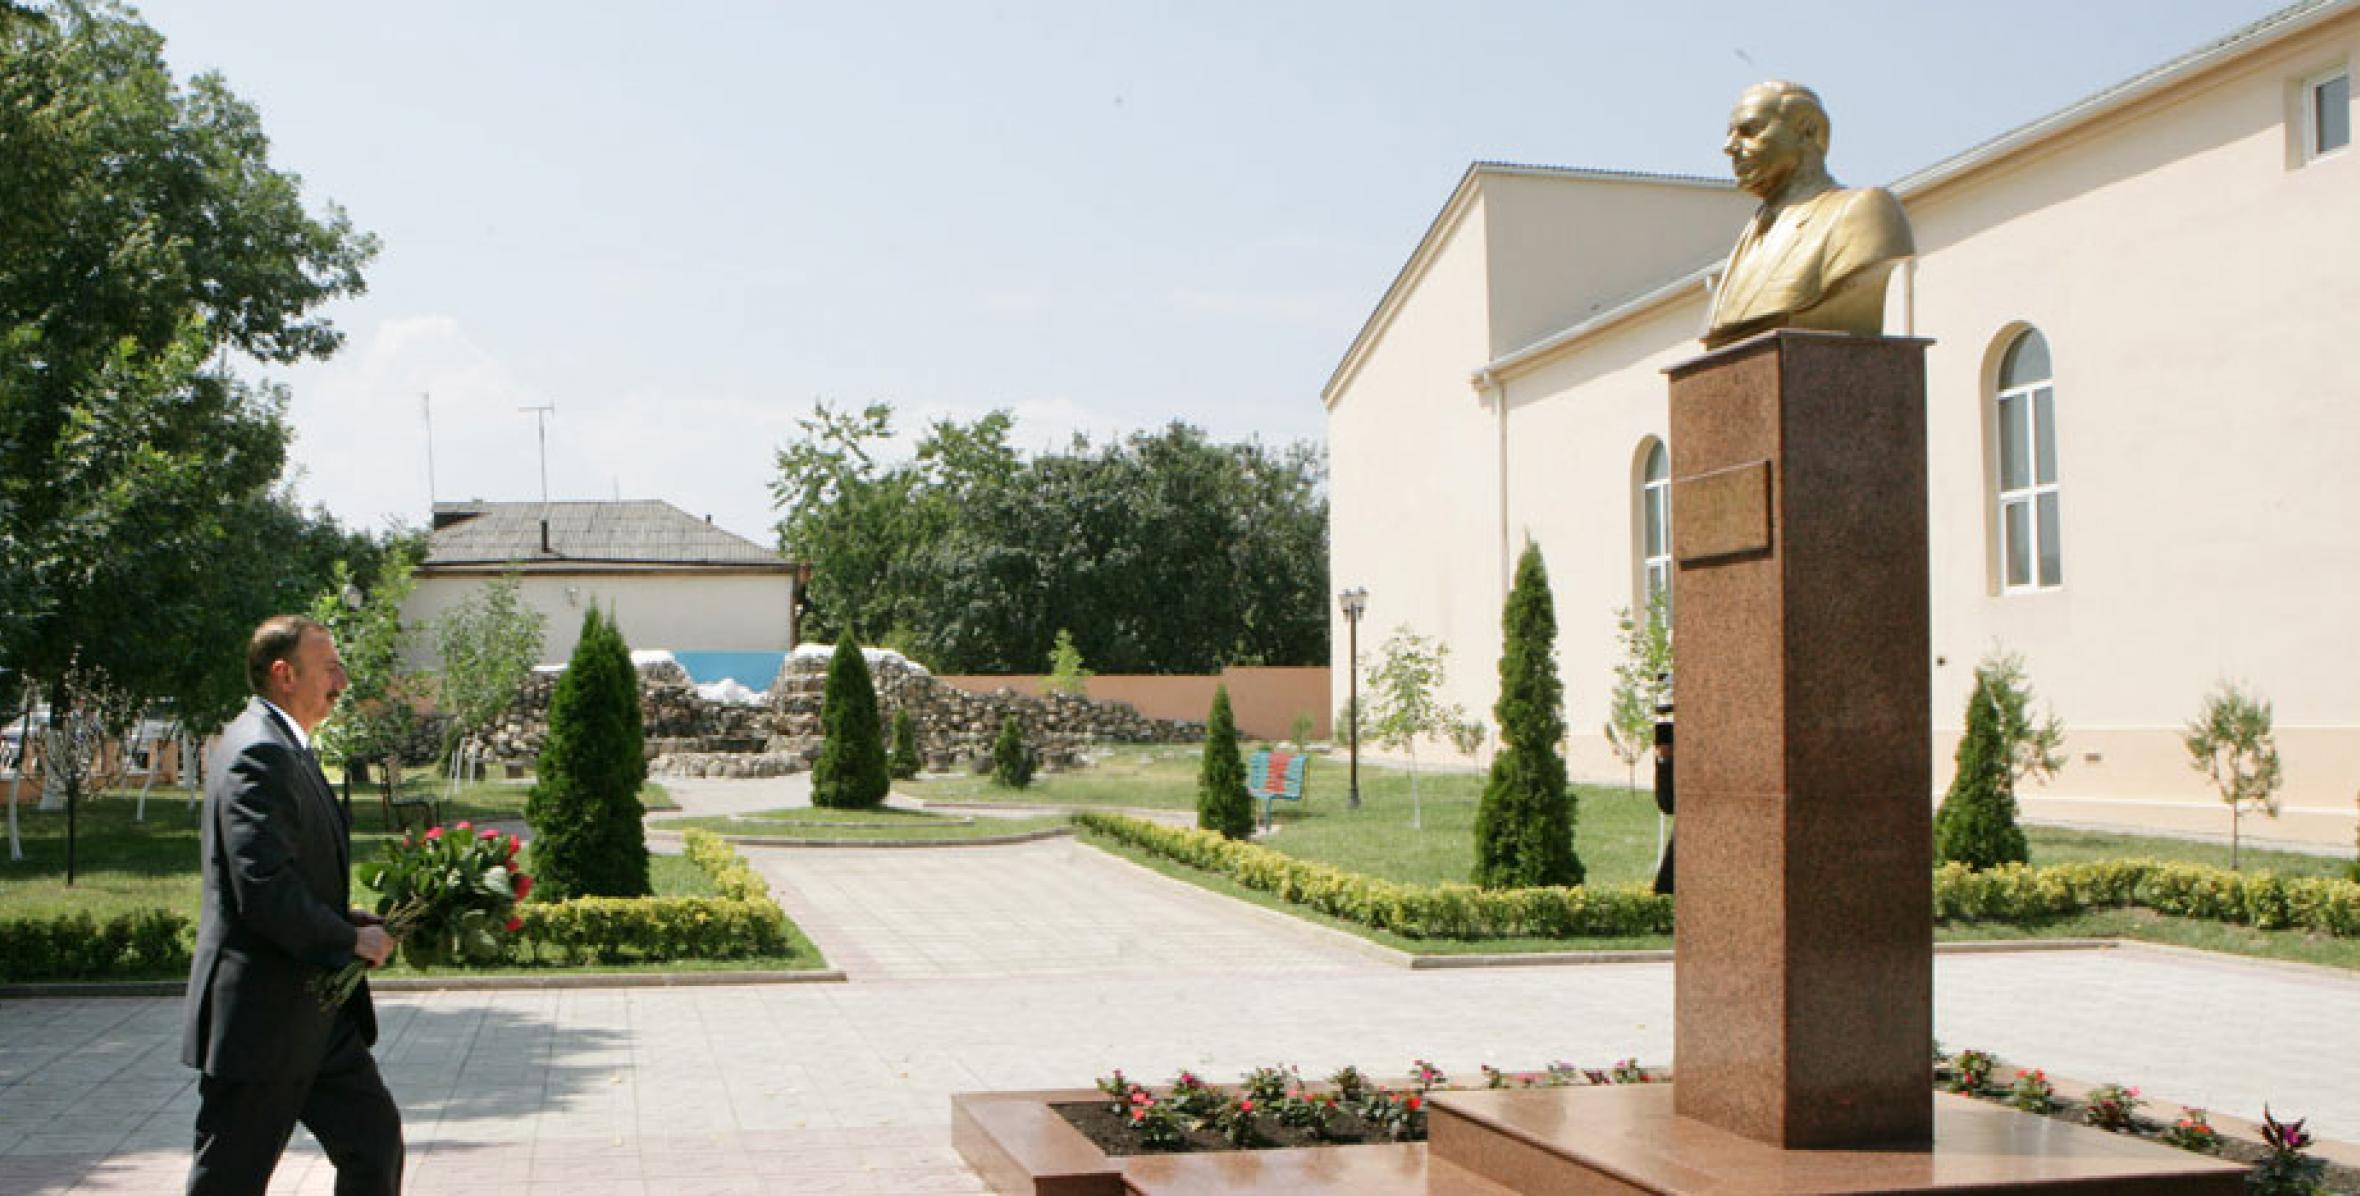 Ilham Aliyev paid tribute to the monument of national leader Heydar Aliyev in the city of Gusar